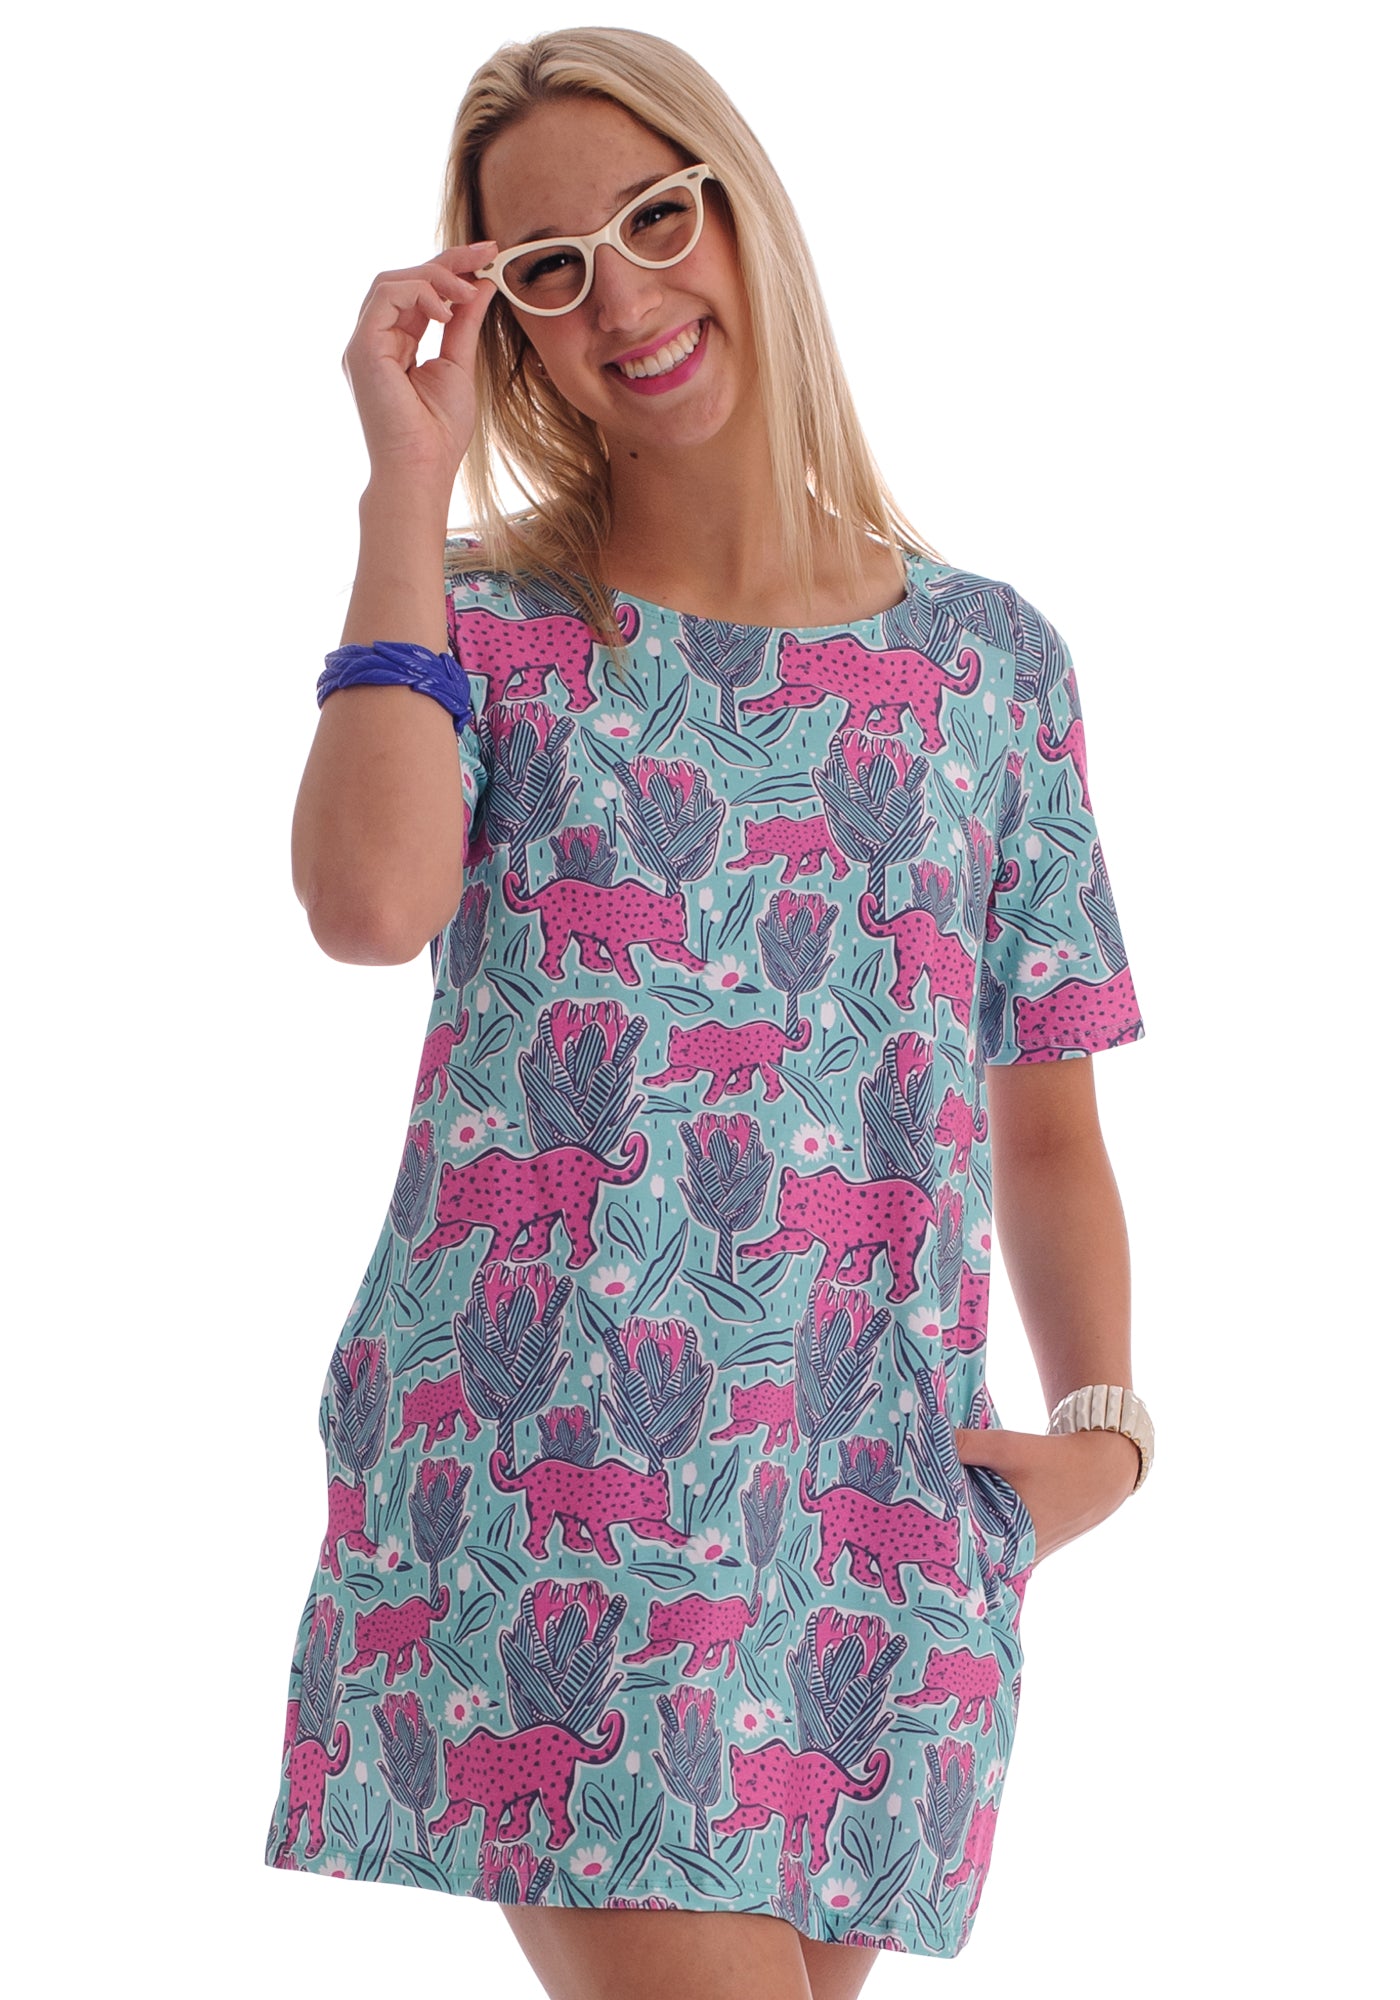 Blonde haired model with glasses in mint green and pink pocket tunic with a print of protea flowers and jaguars